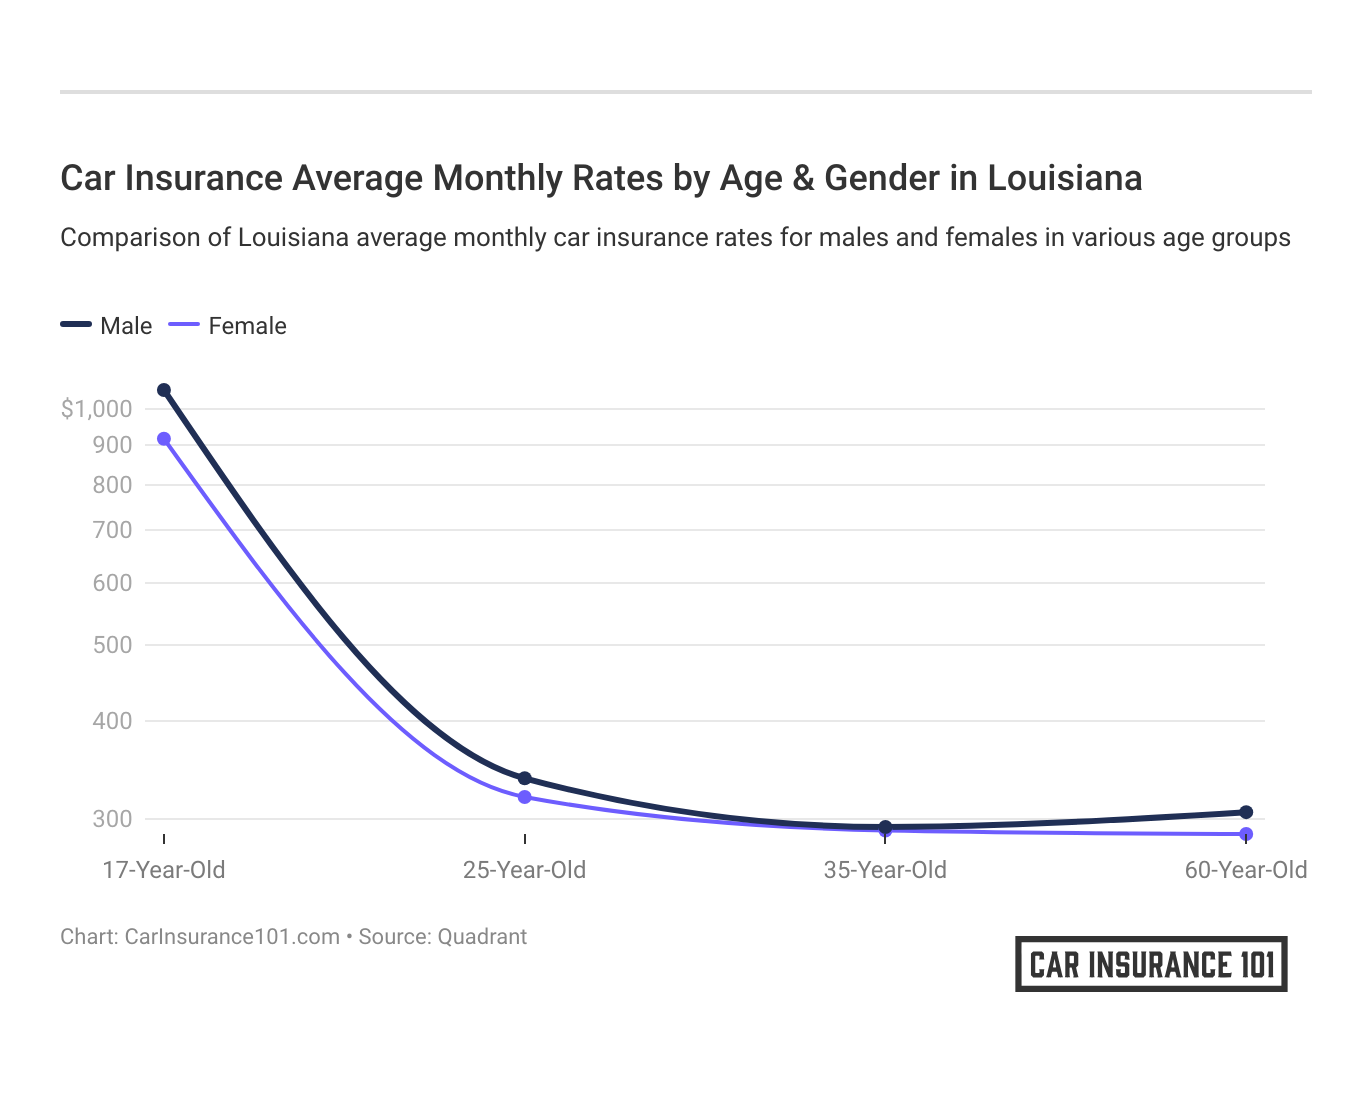 <h3>Car Insurance Average Monthly Rates by Age & Gender in Louisiana</h3>